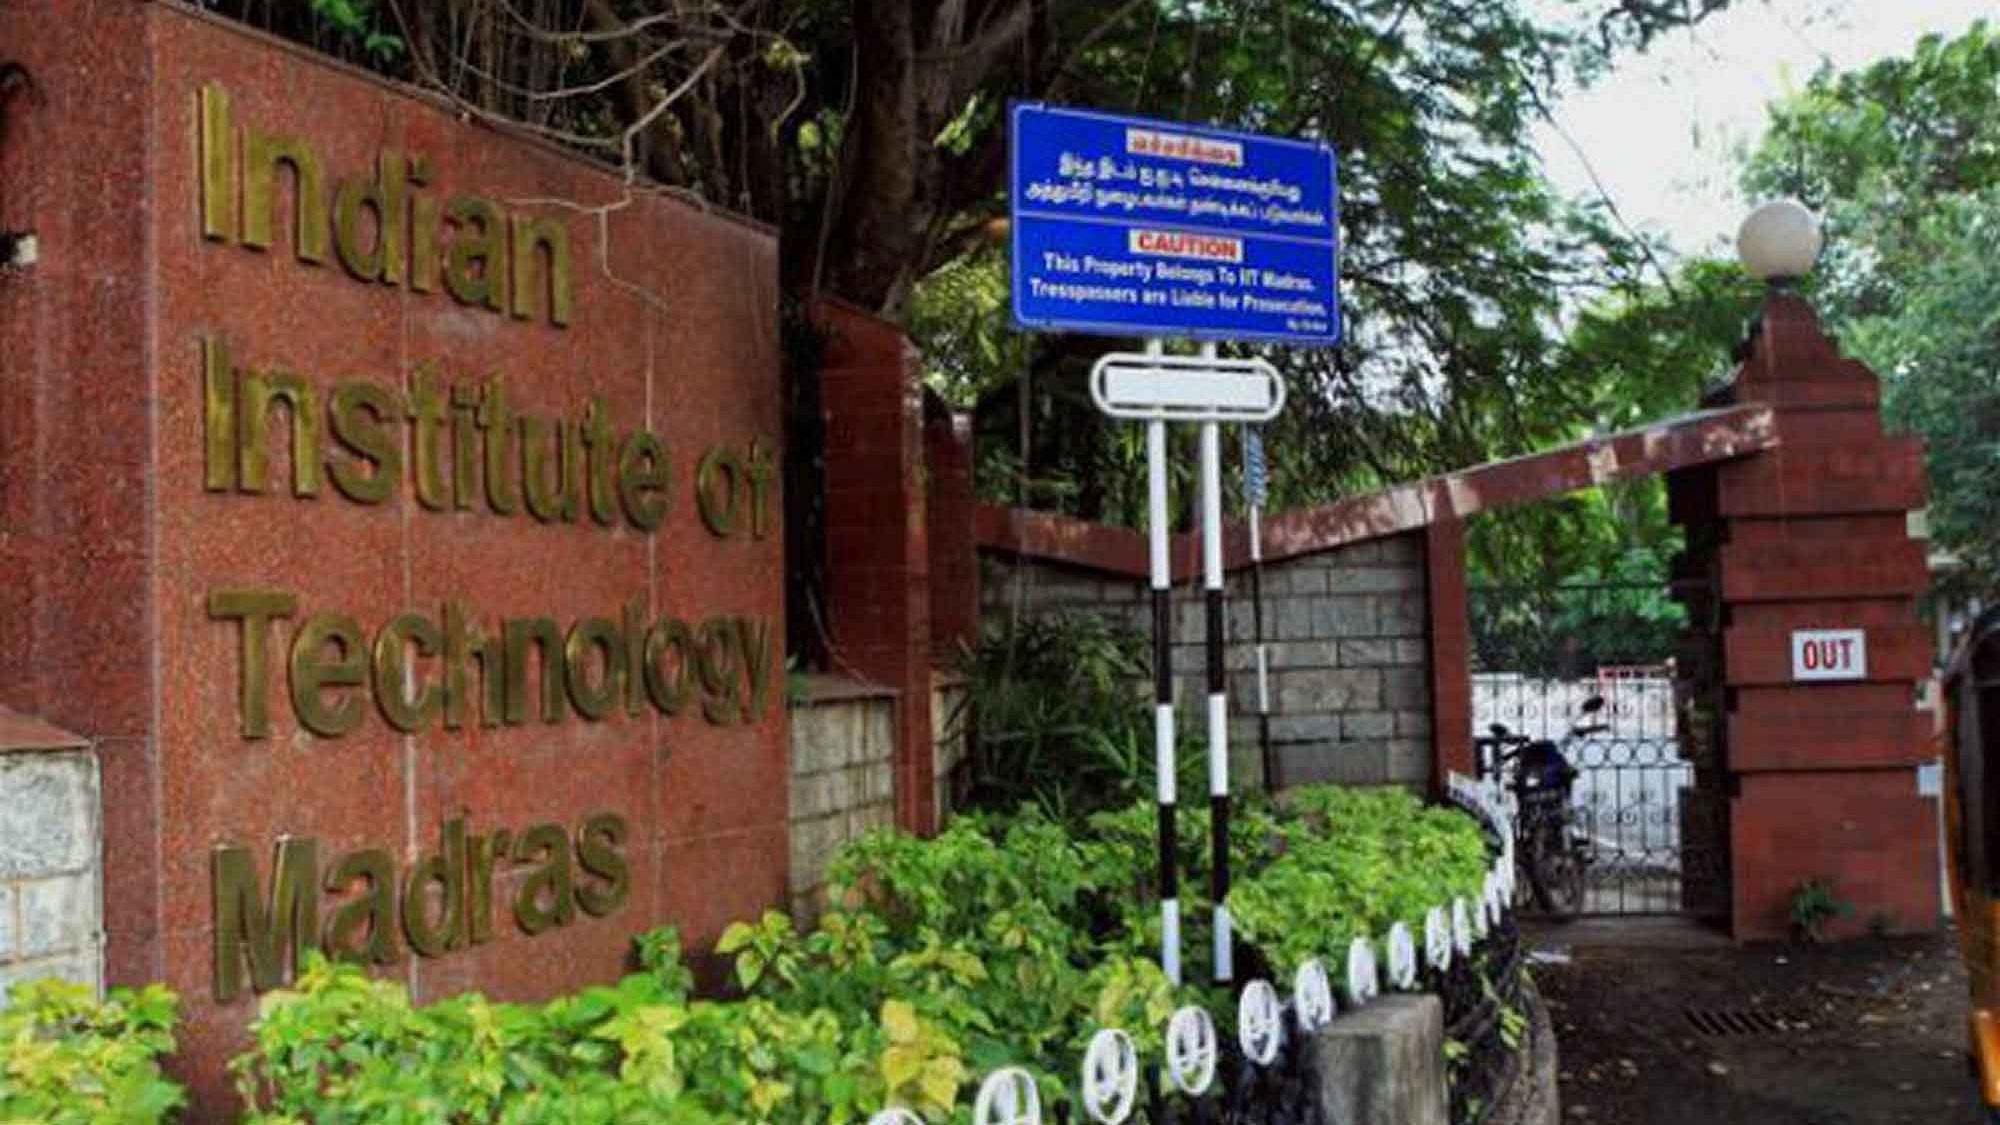 An informal report initiates by students of IIT-Madras last year had alleged “moral policing” in the campus.